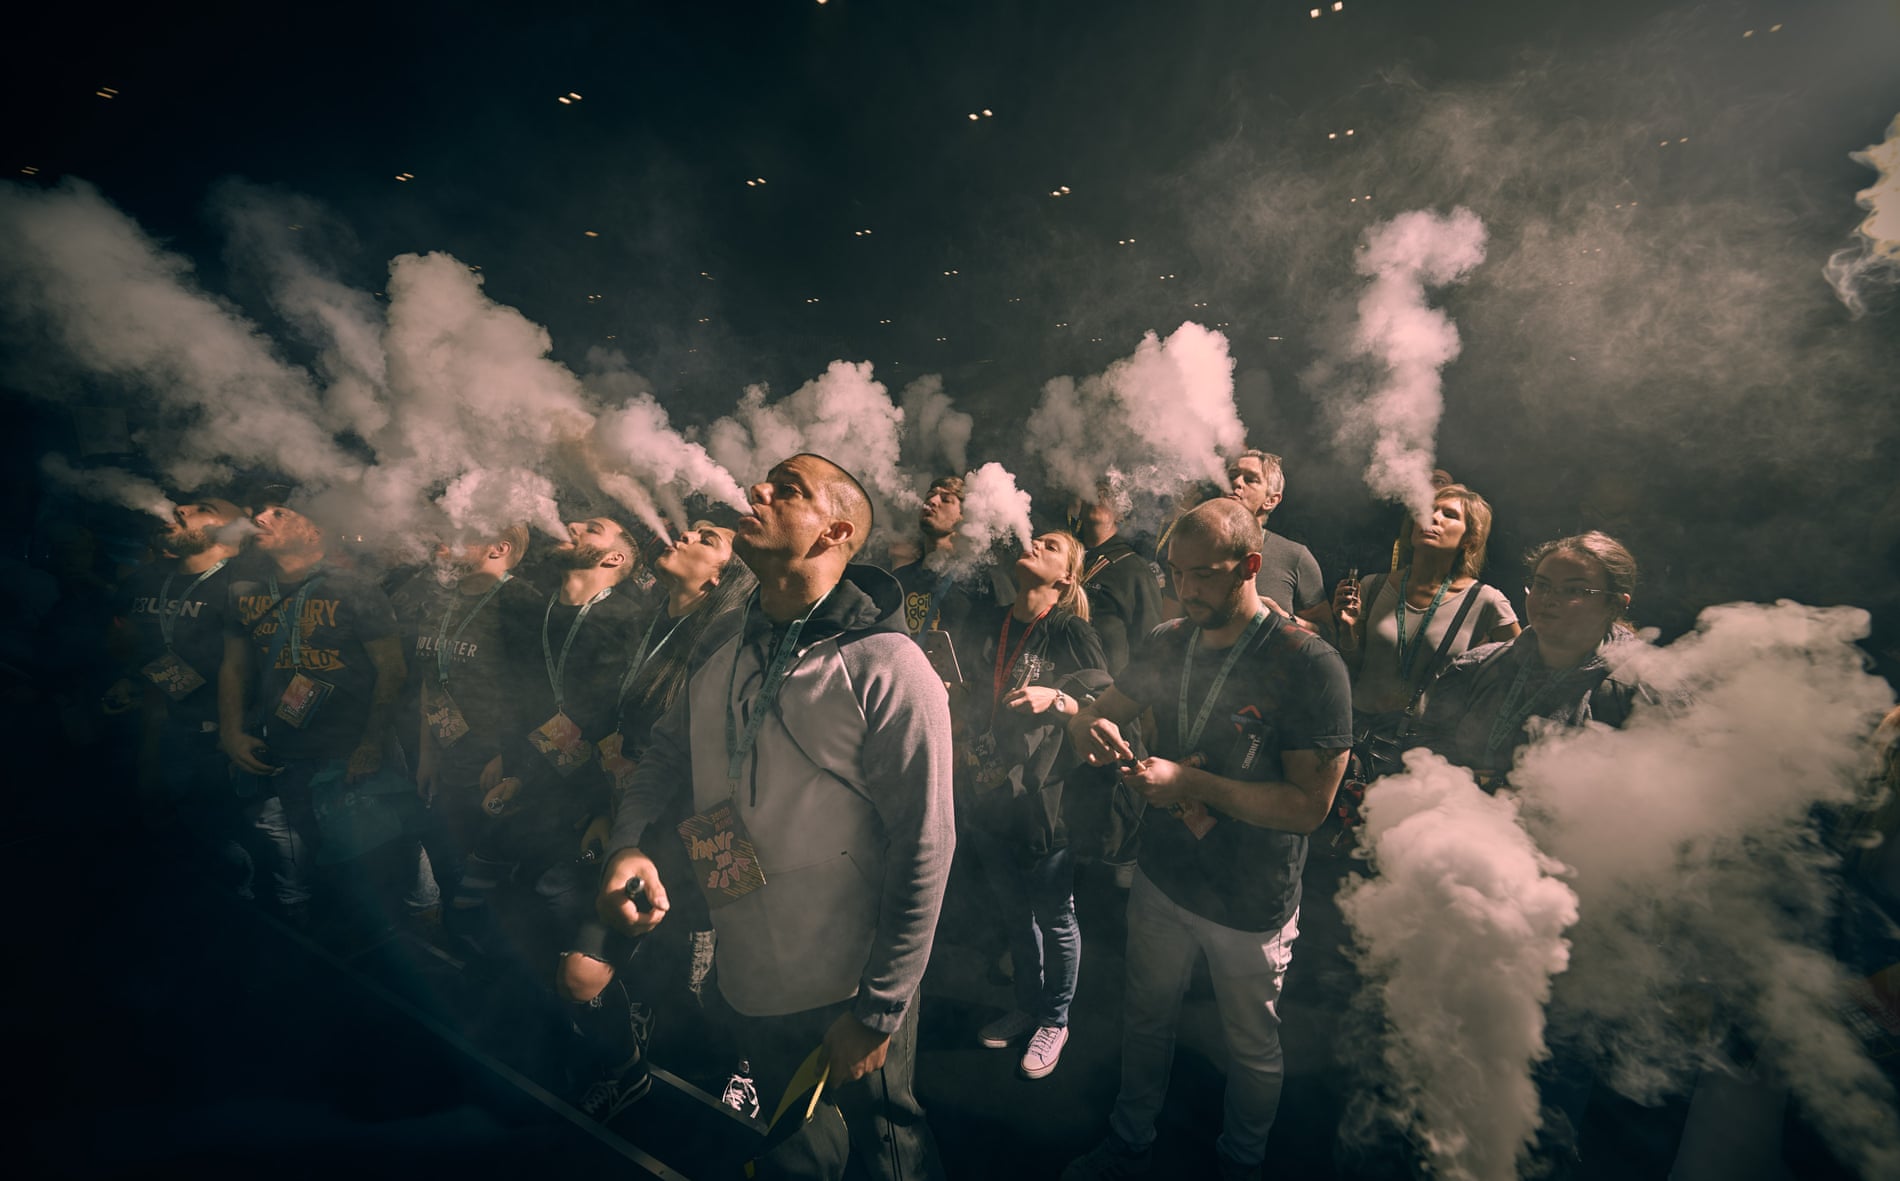 Participants exhale in unison at a mass vape at the trade fair Vape Jam in London, in April 2018